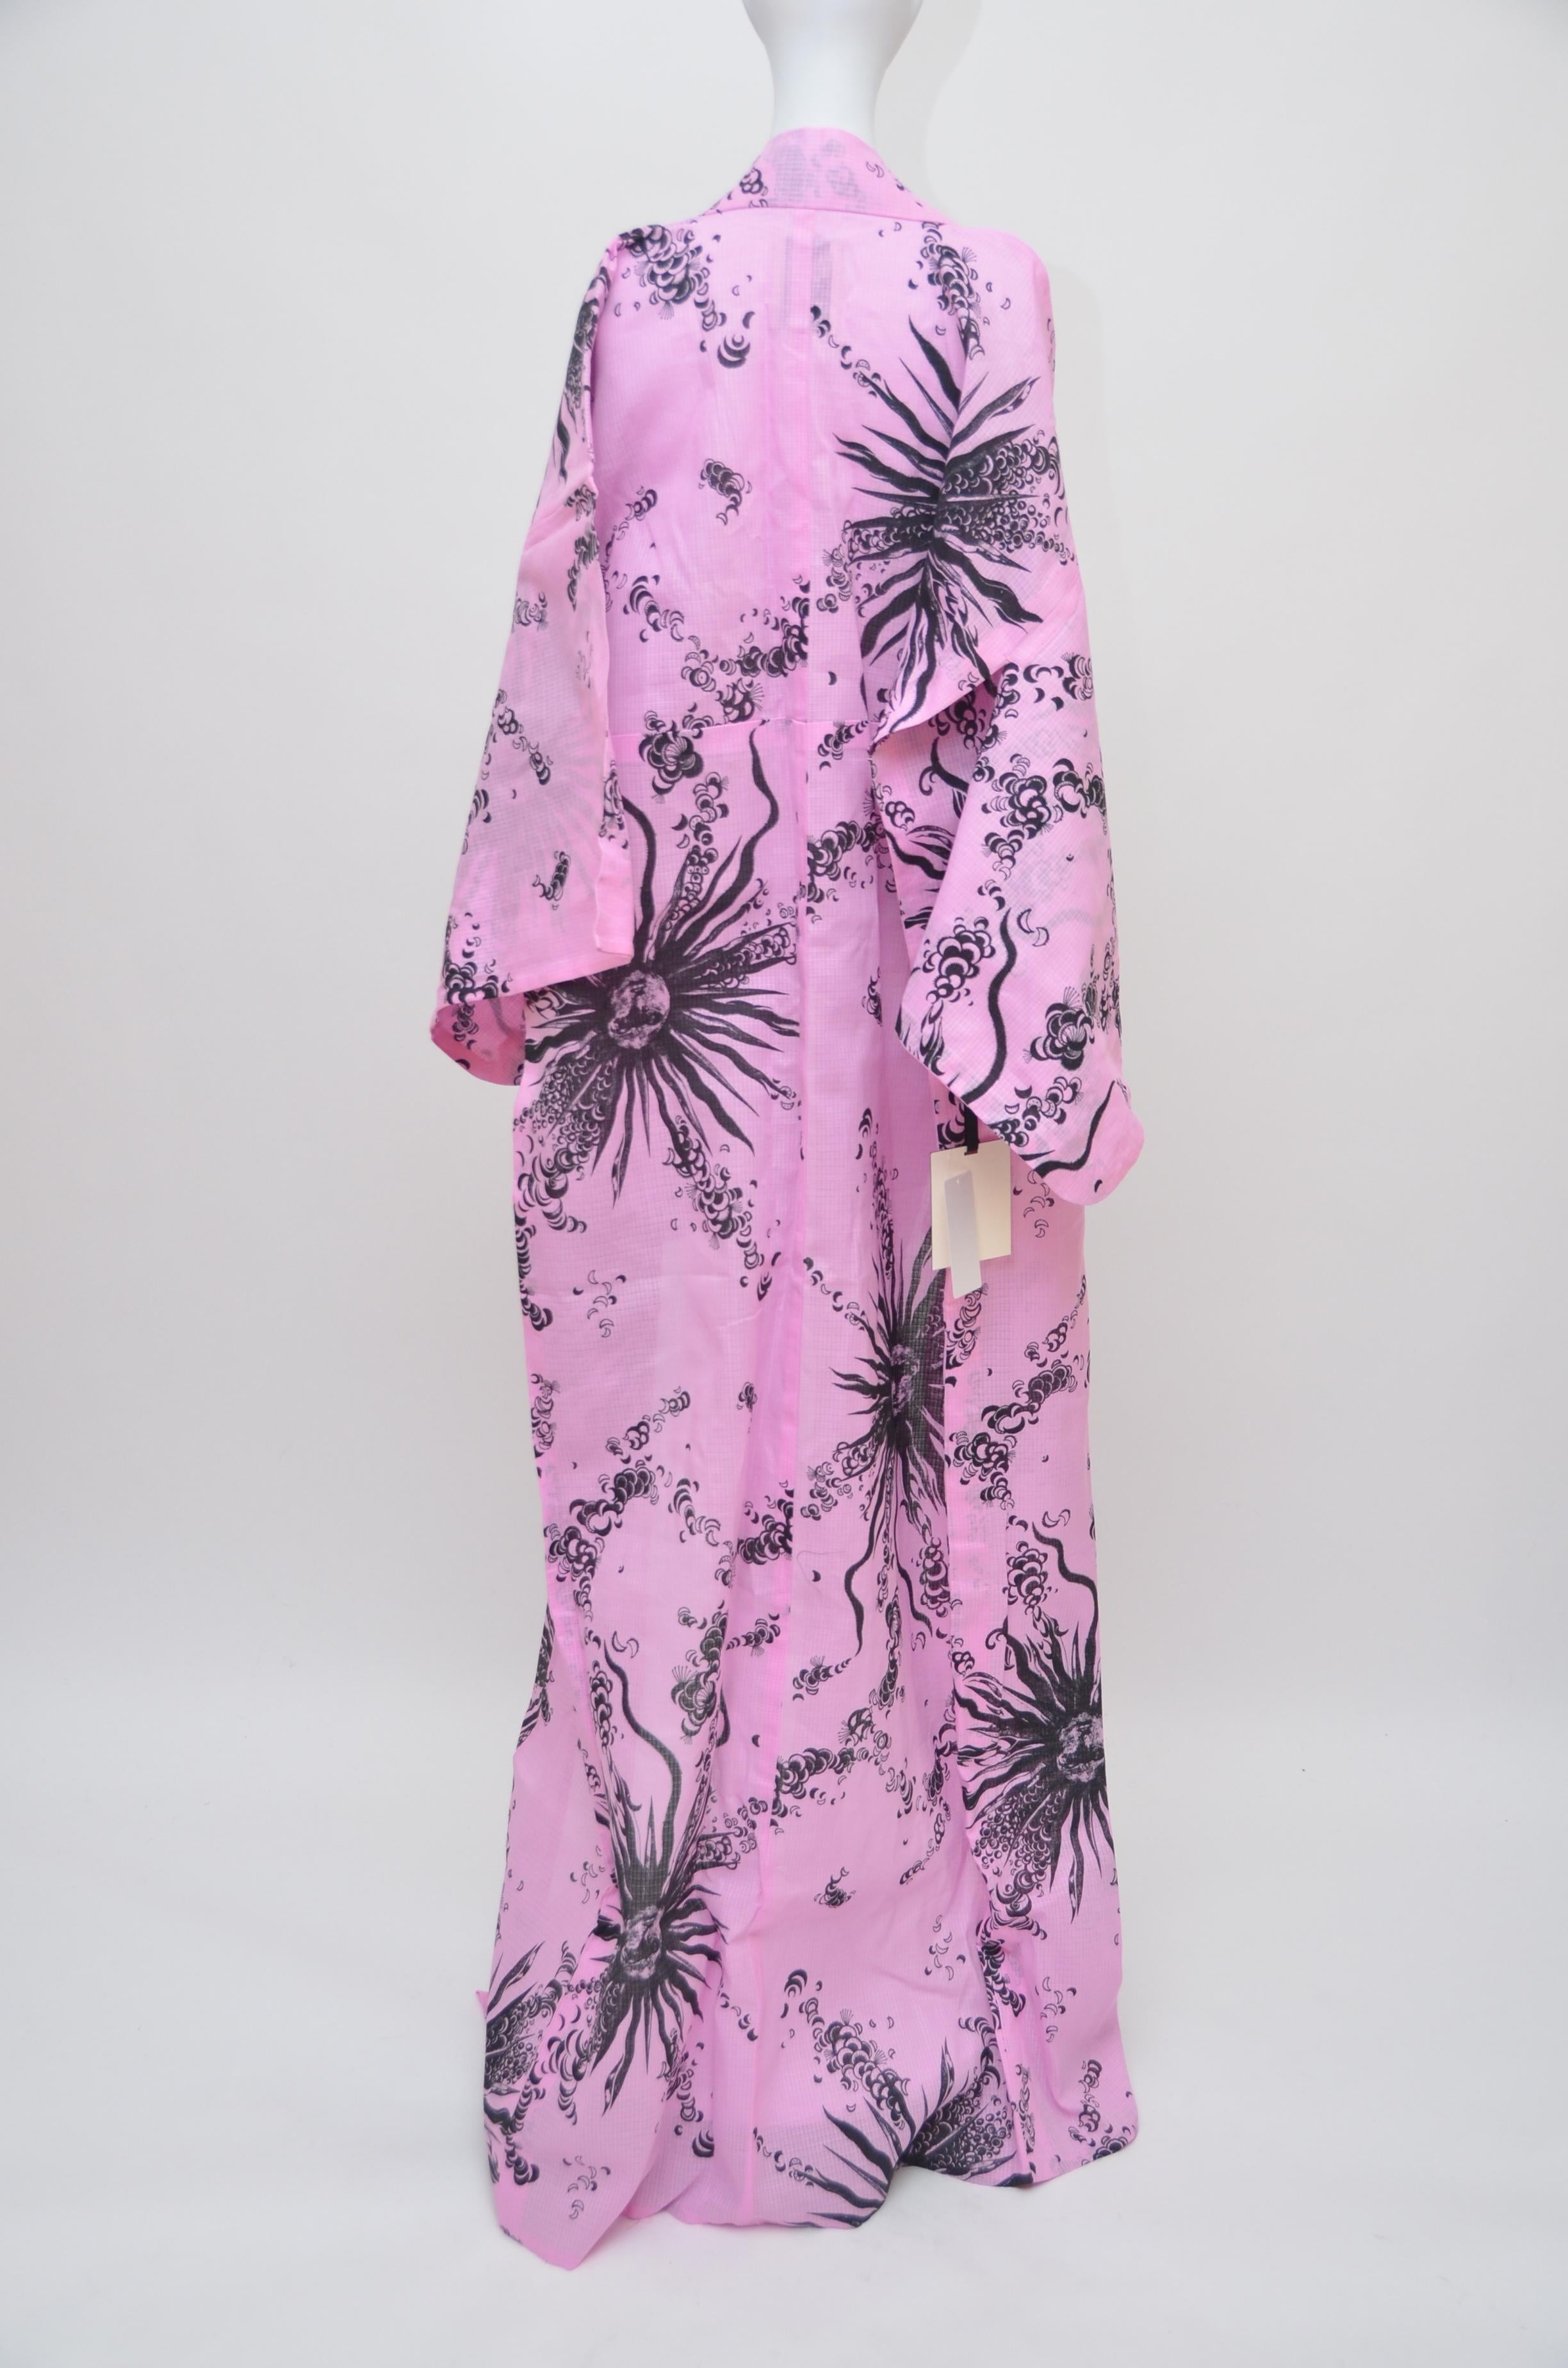 Italian fashion designer Fausto Puglisi  has partnered with online retailer Yoox to launch two cotton yukatas (the summer version of a kimono). In speaking to press about the pieces Puglisi said, “I’ve created a Westernized form of the classic